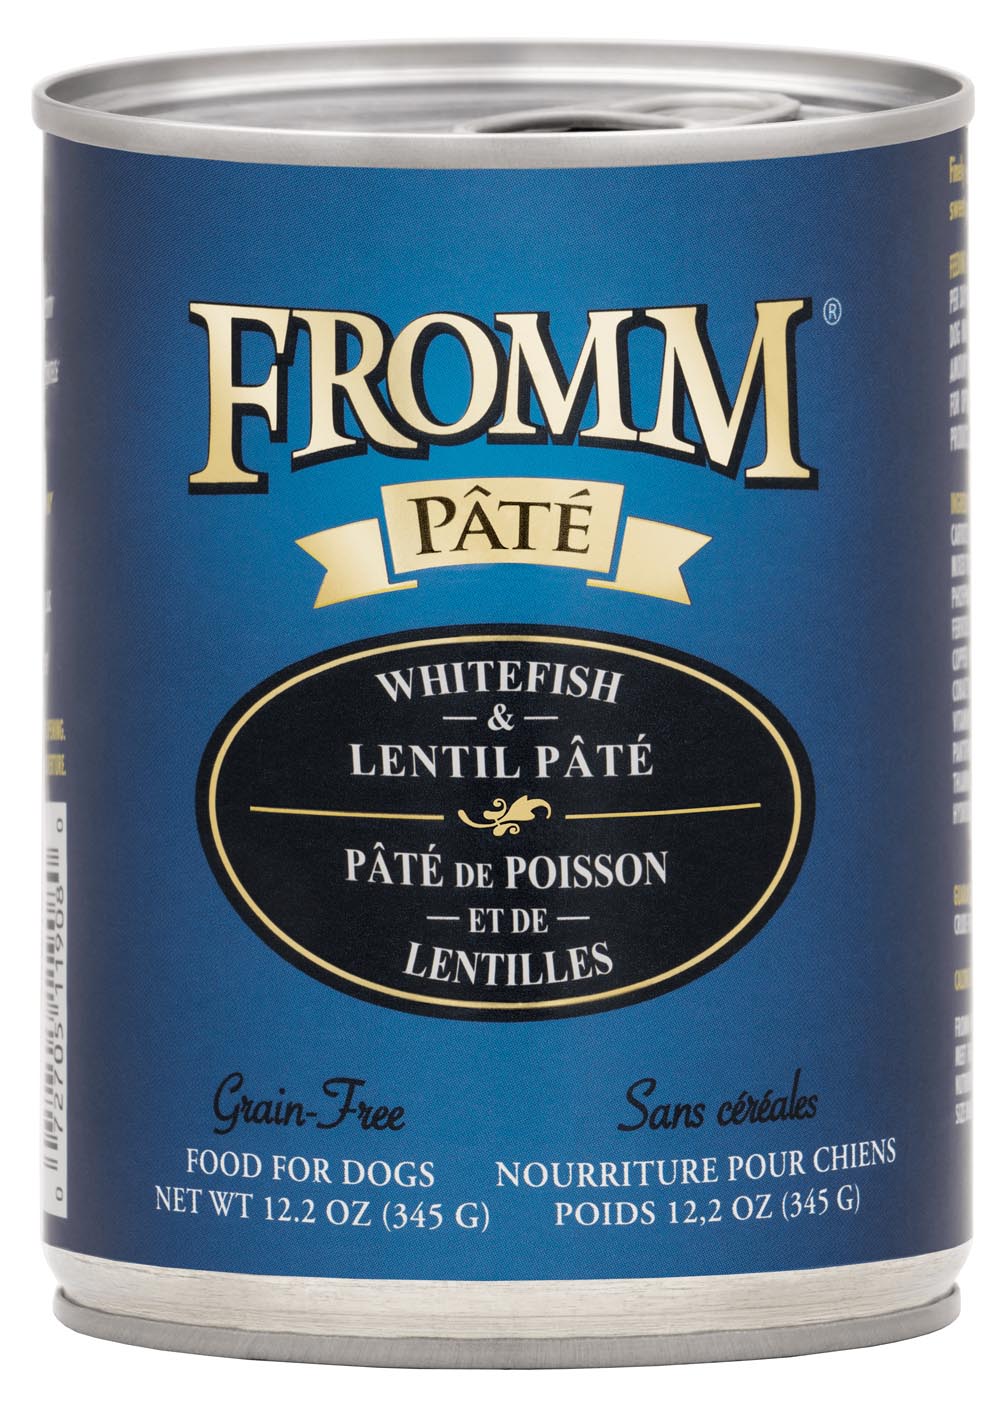 Fromm Whitefish & Lentil Pate Food for Dogs, 12.2 OZ